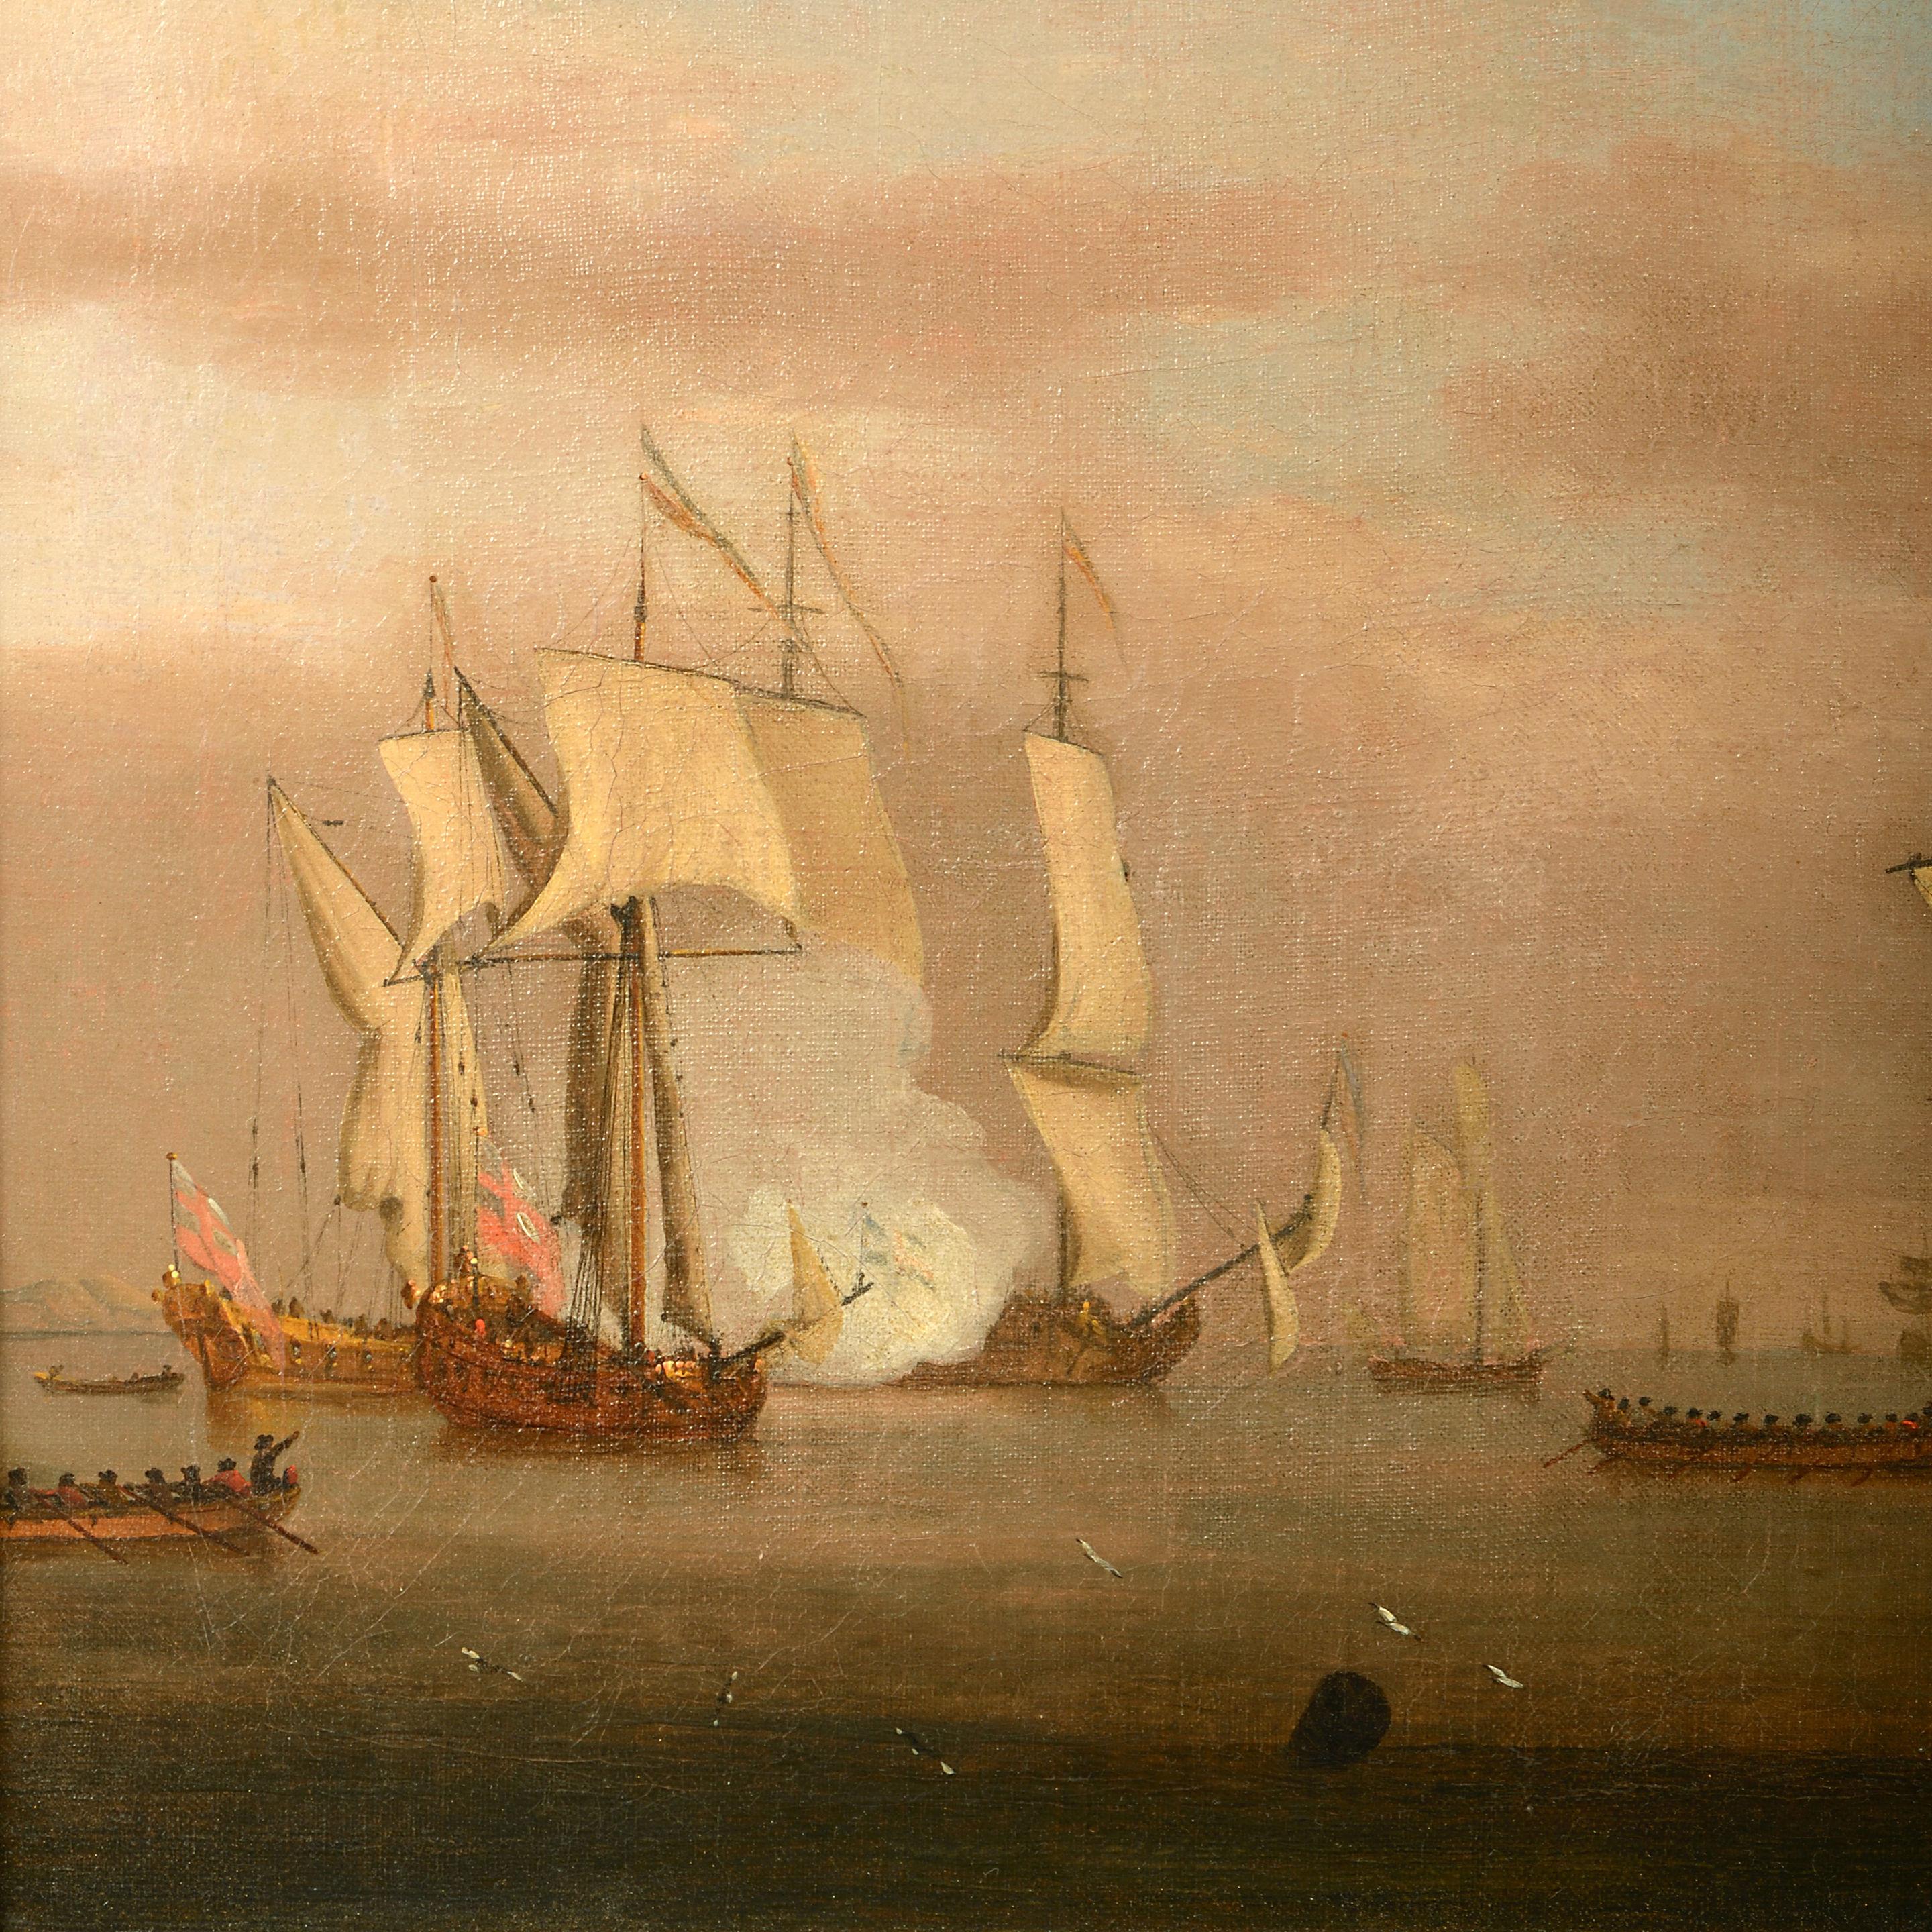 Studio Willem van de Velde the Younger II (1633-1707) 

English ships near the shore firing guns in salute. 

Oil on canvas; held in a carved and gilded wood frame. Dimensions refer to framed dimensions. 

Provenance: Earls of Dundonald